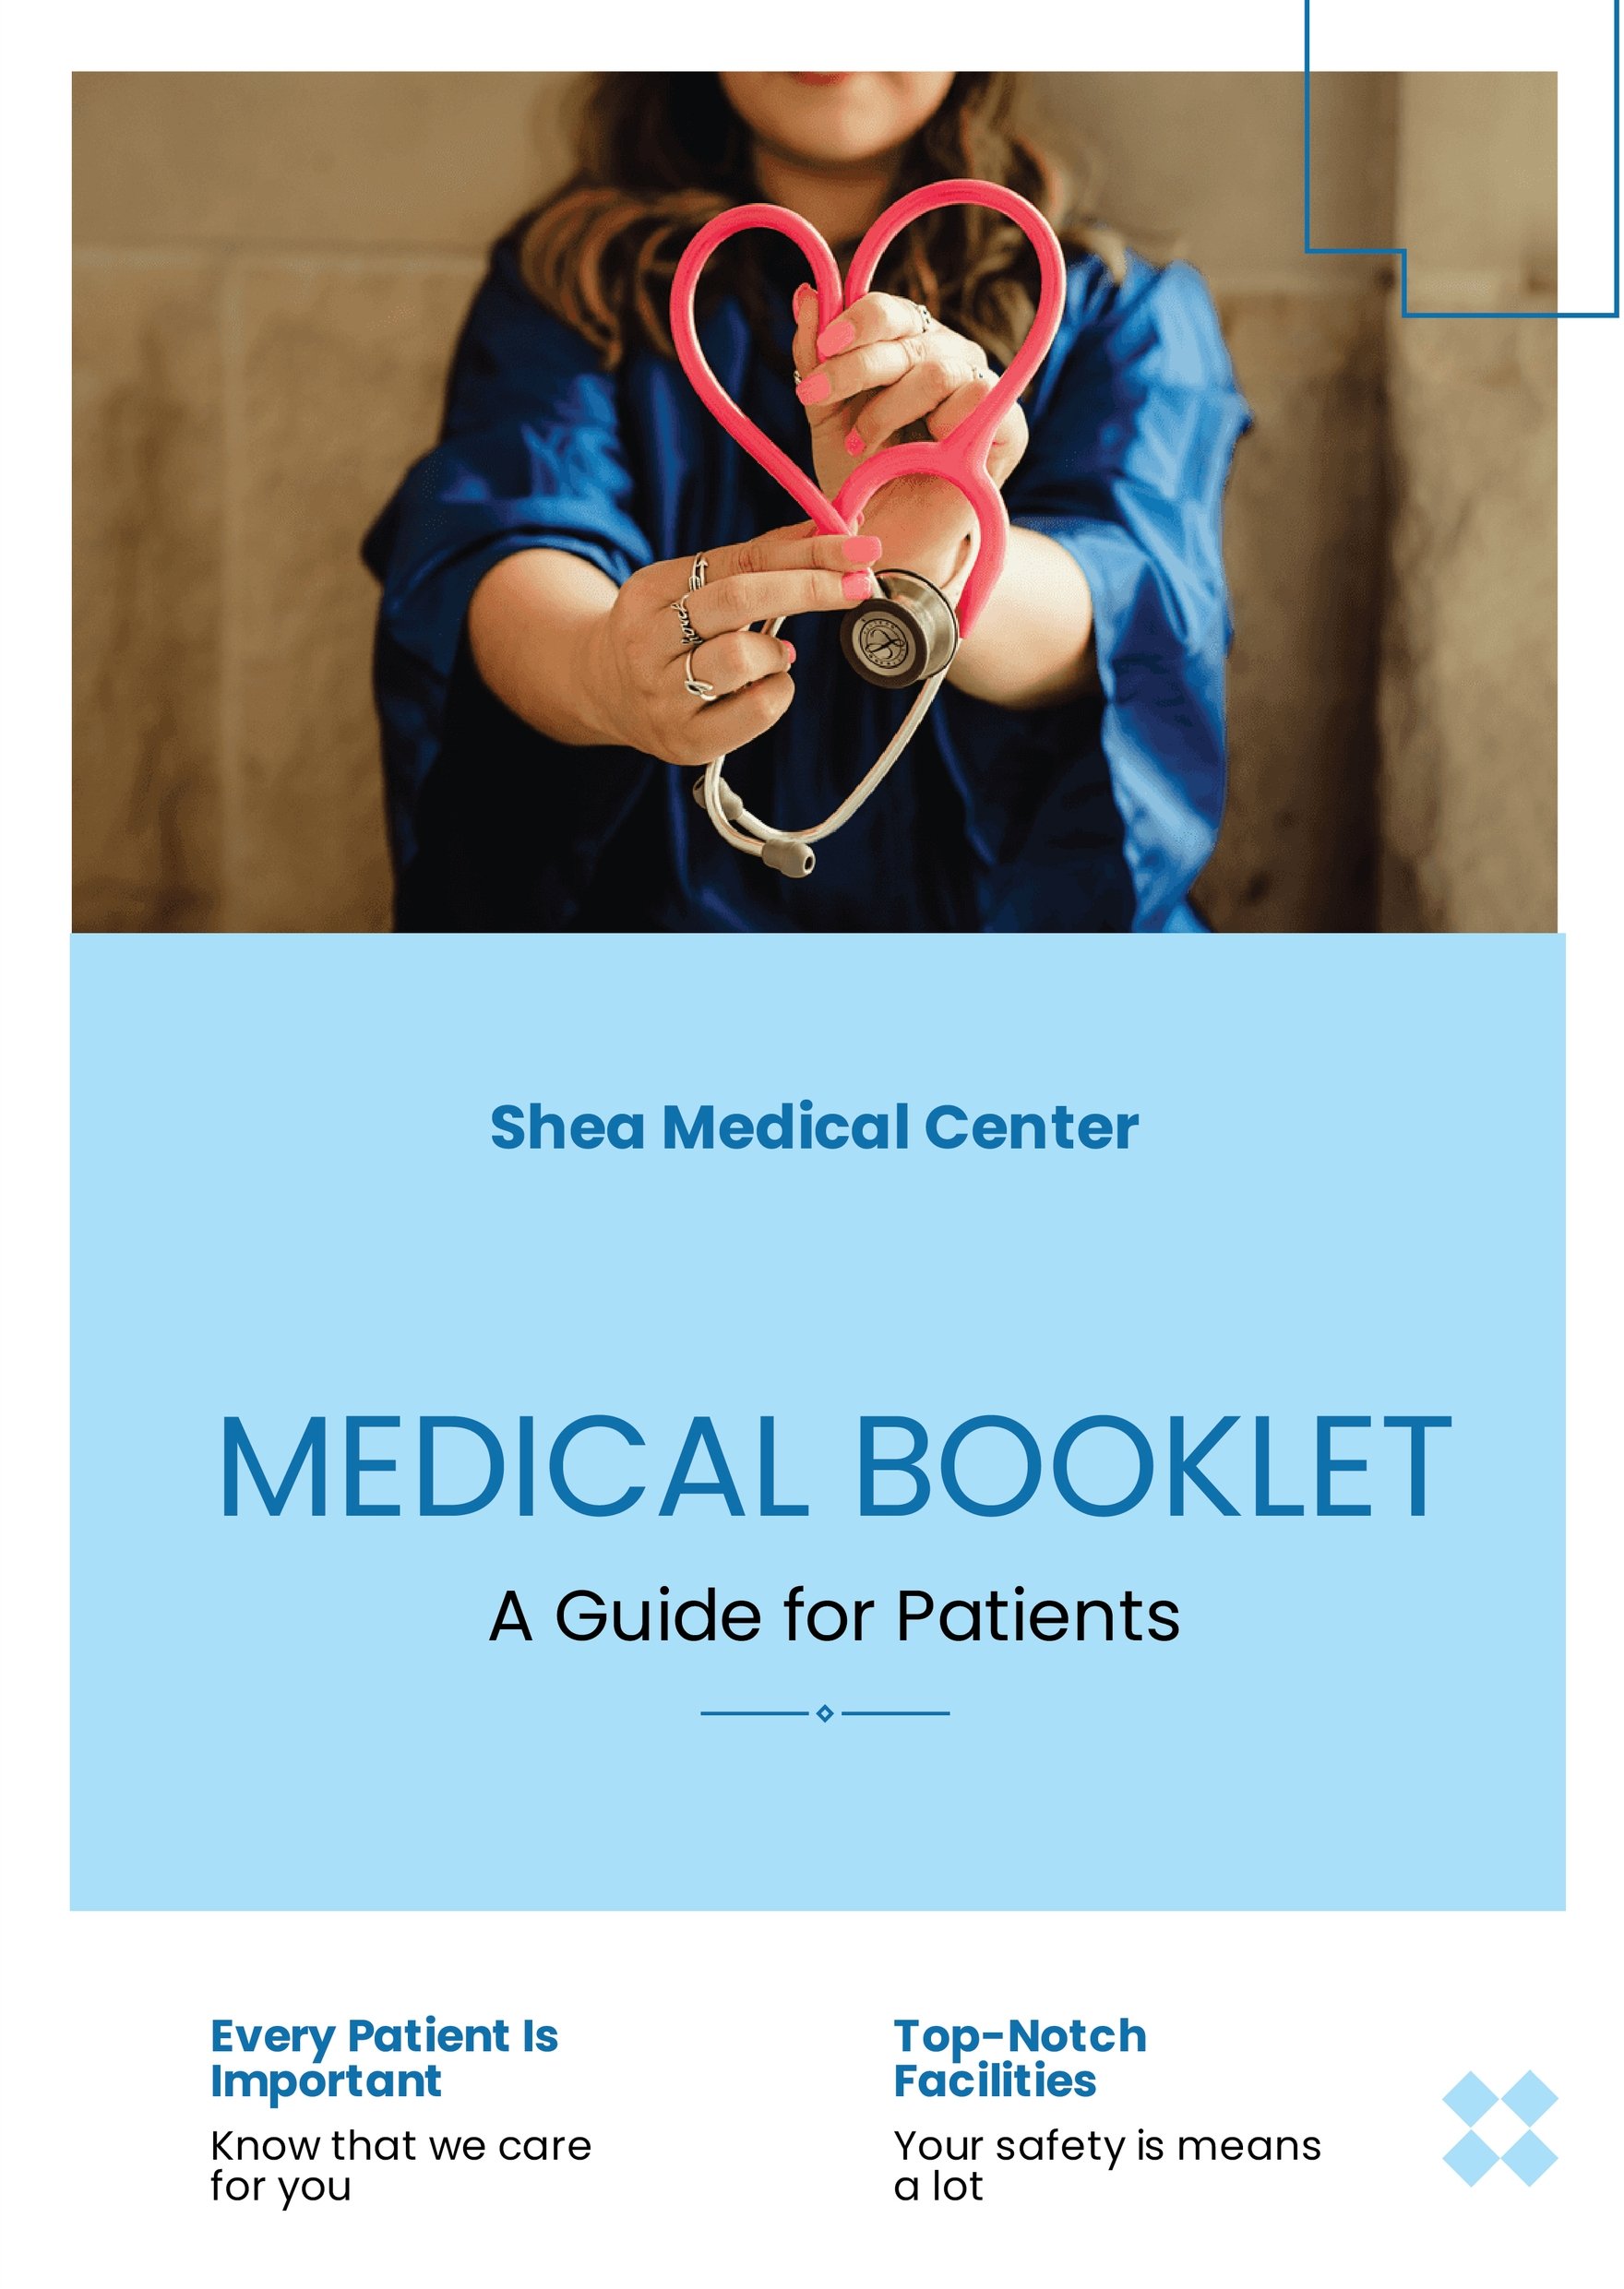 Free Medical Booklet Template in Word, Google Docs, Illustrator, PSD, Apple Pages, Publisher